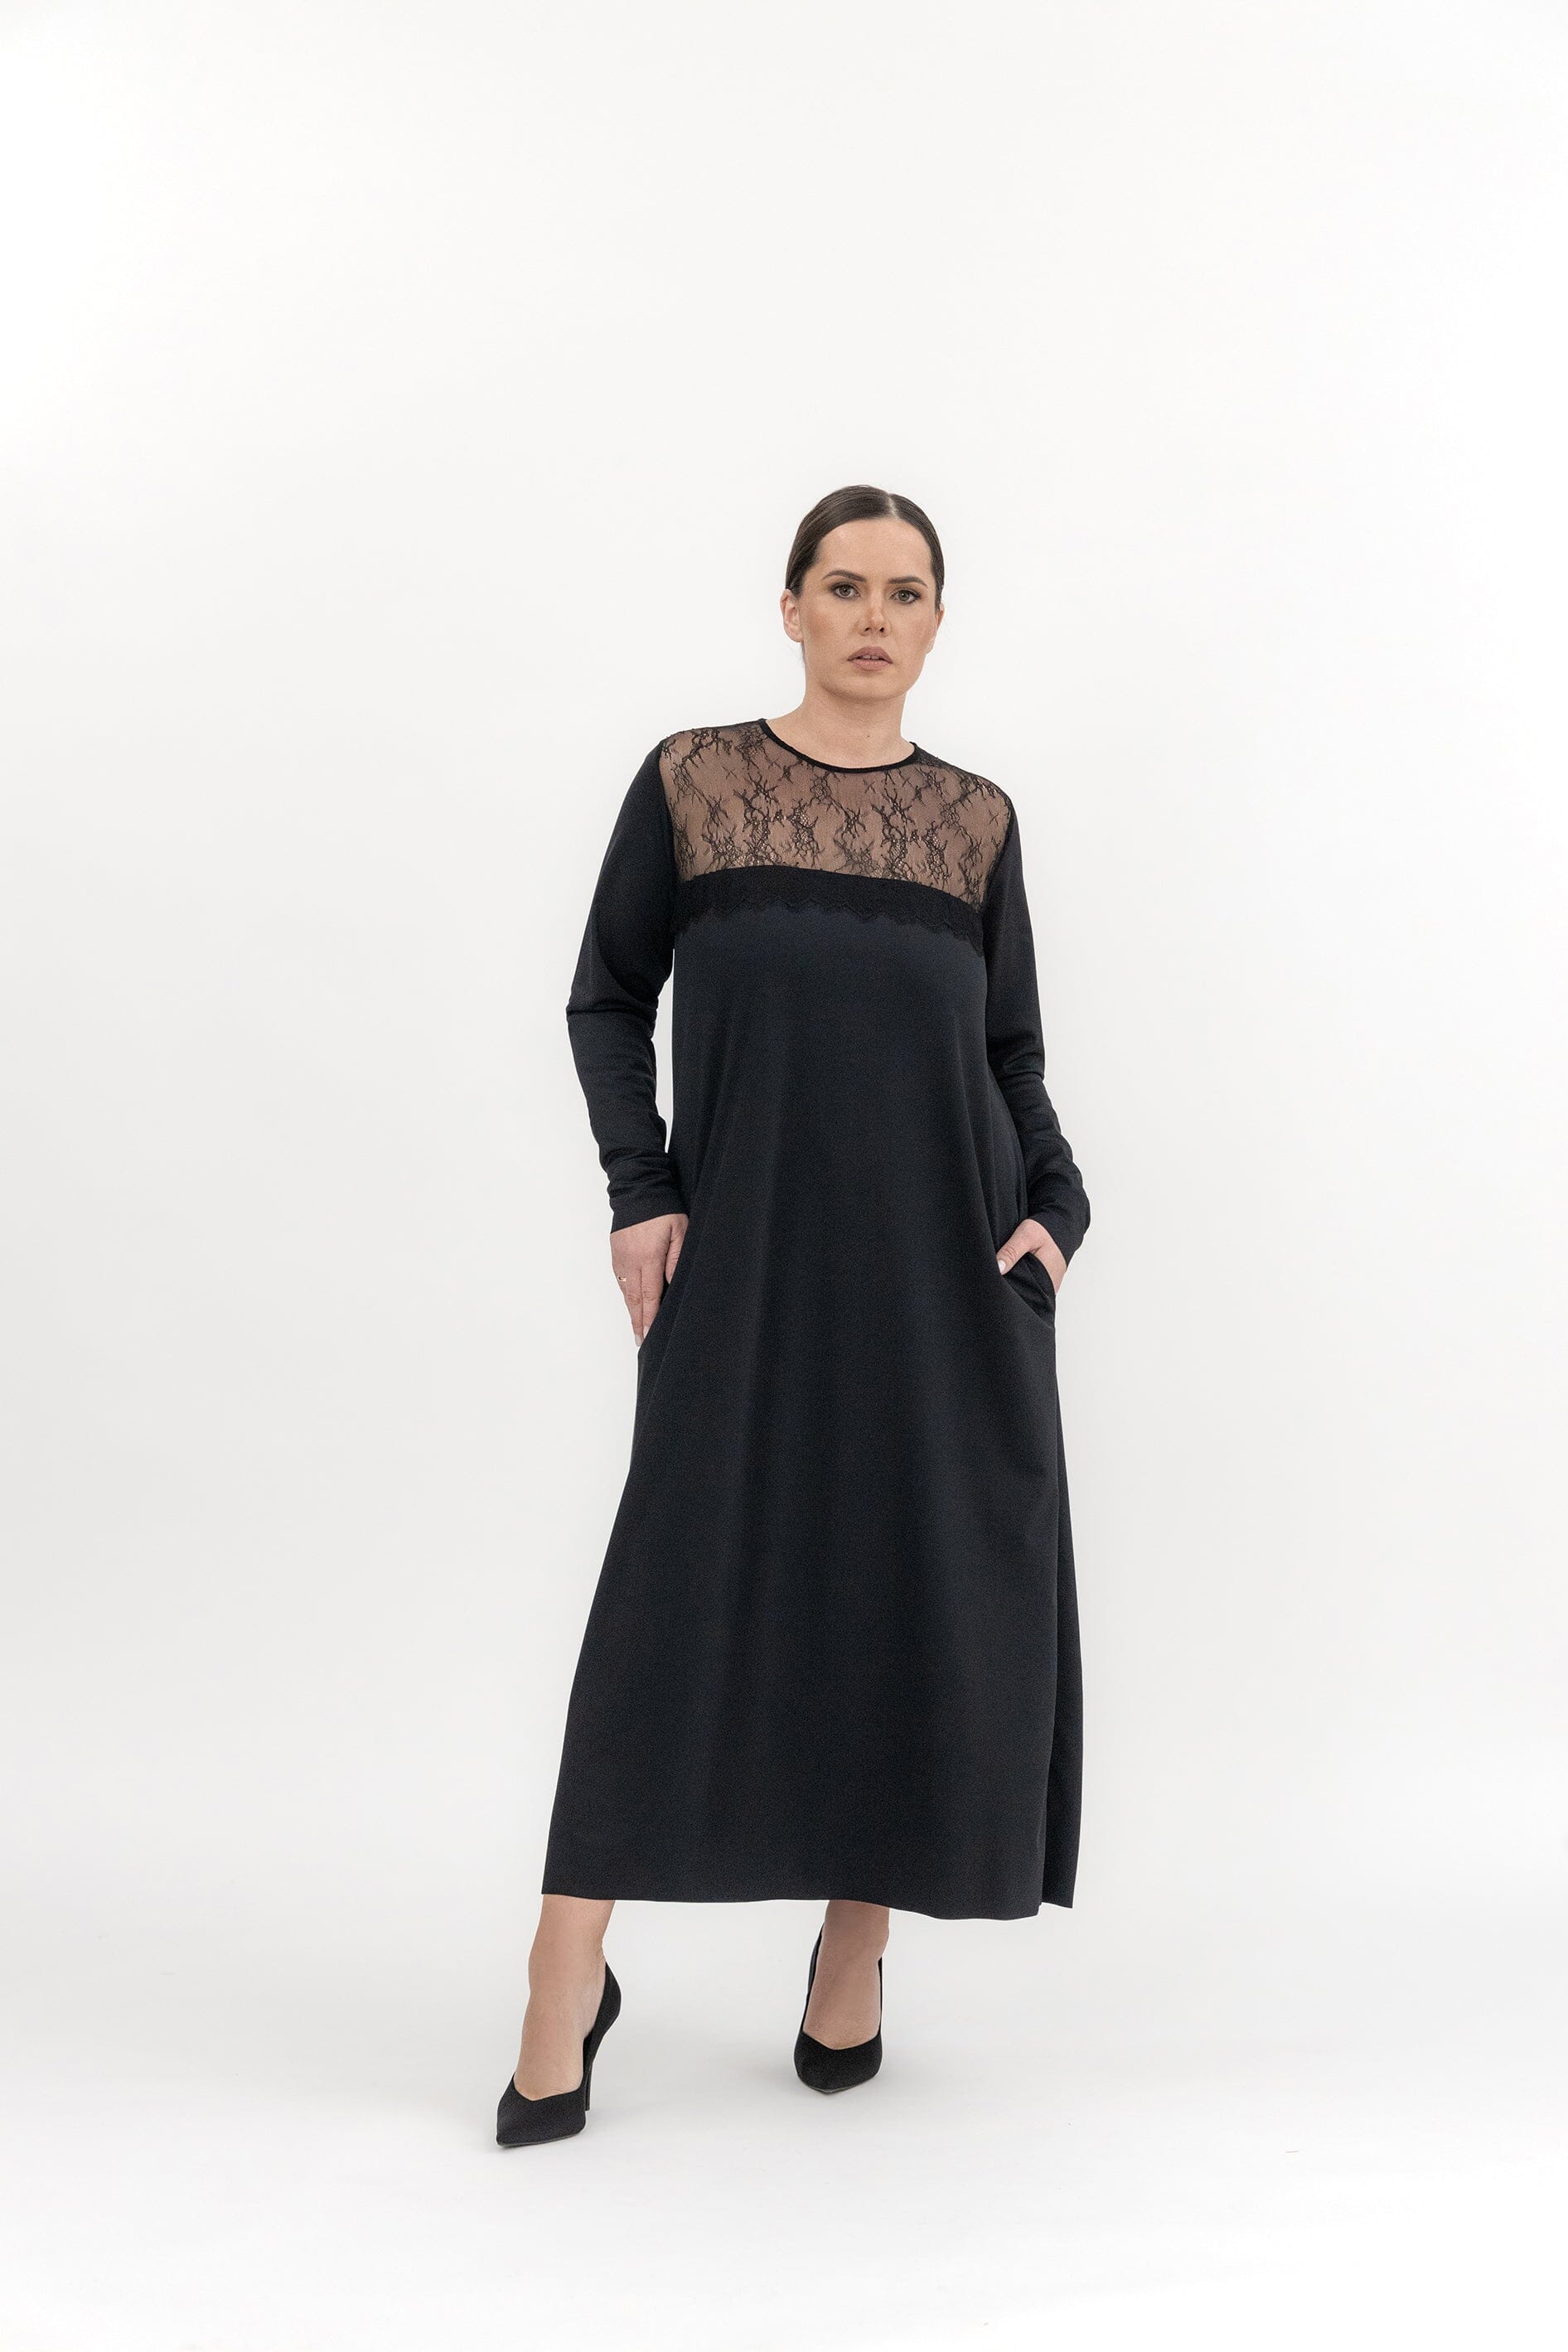  Fades Away Dress Black Product Amoralle